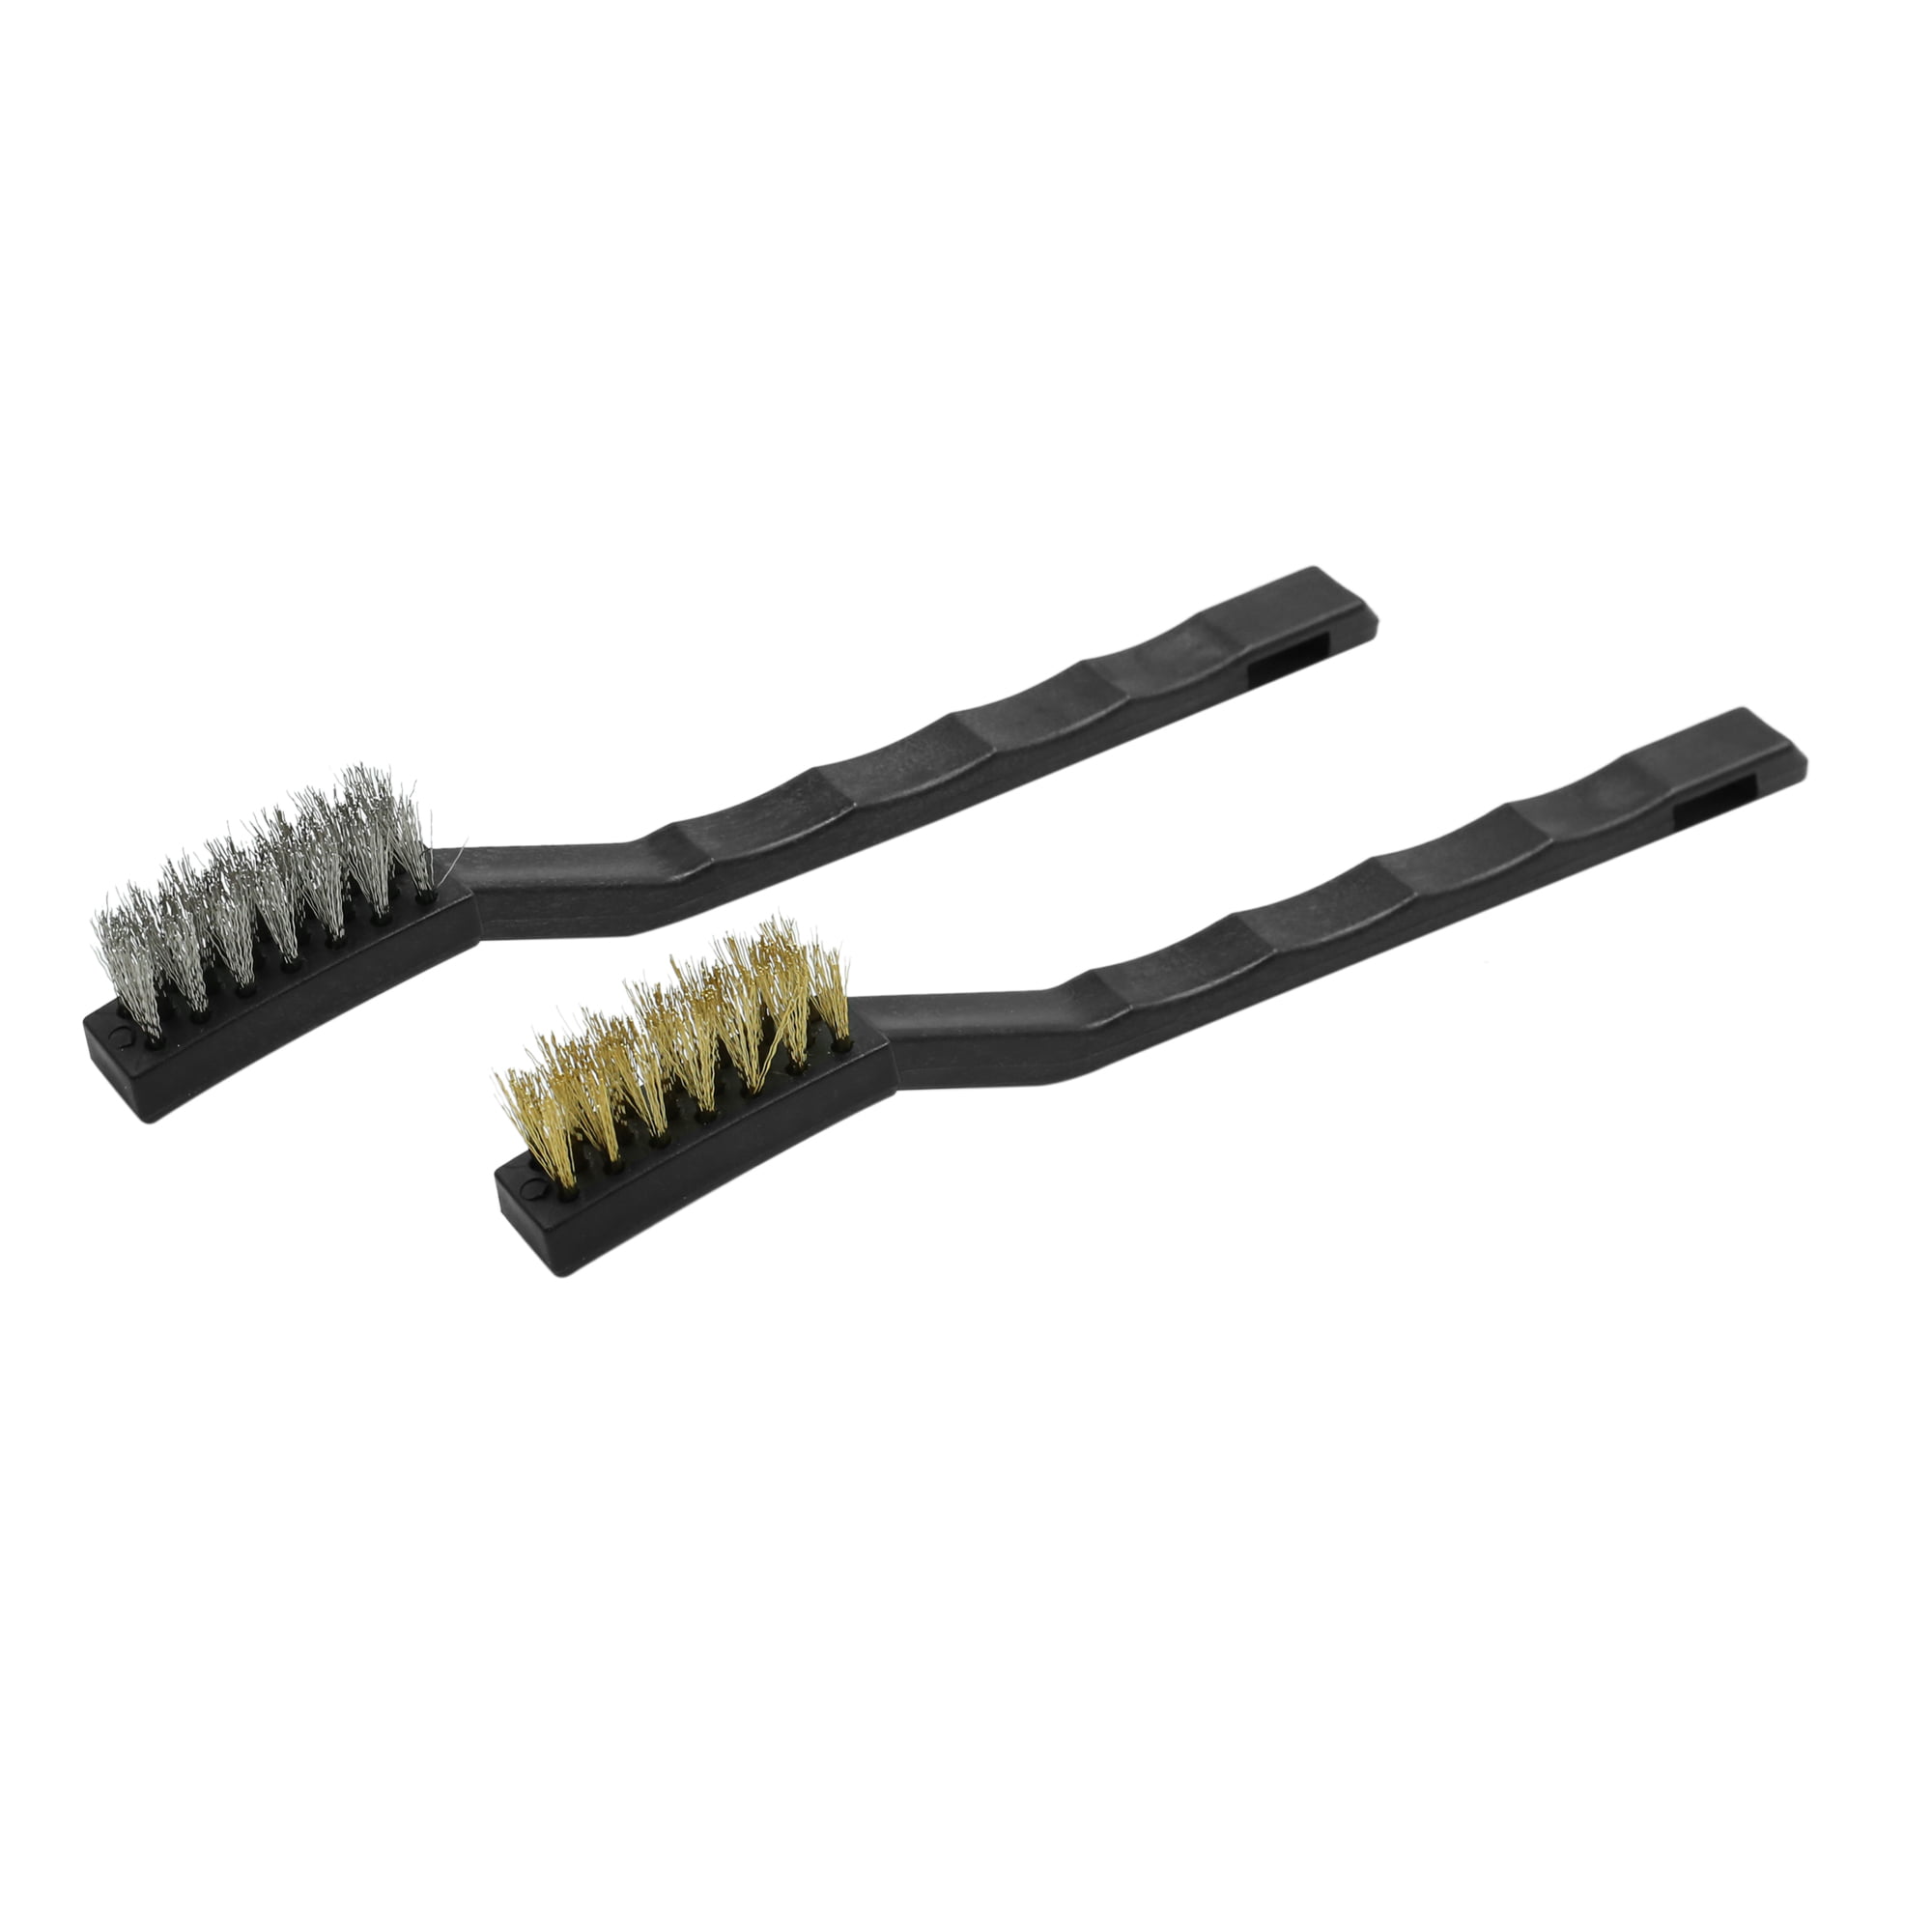 3 For $25 Sata Jet Small Double Sided Cleaning Brushes 